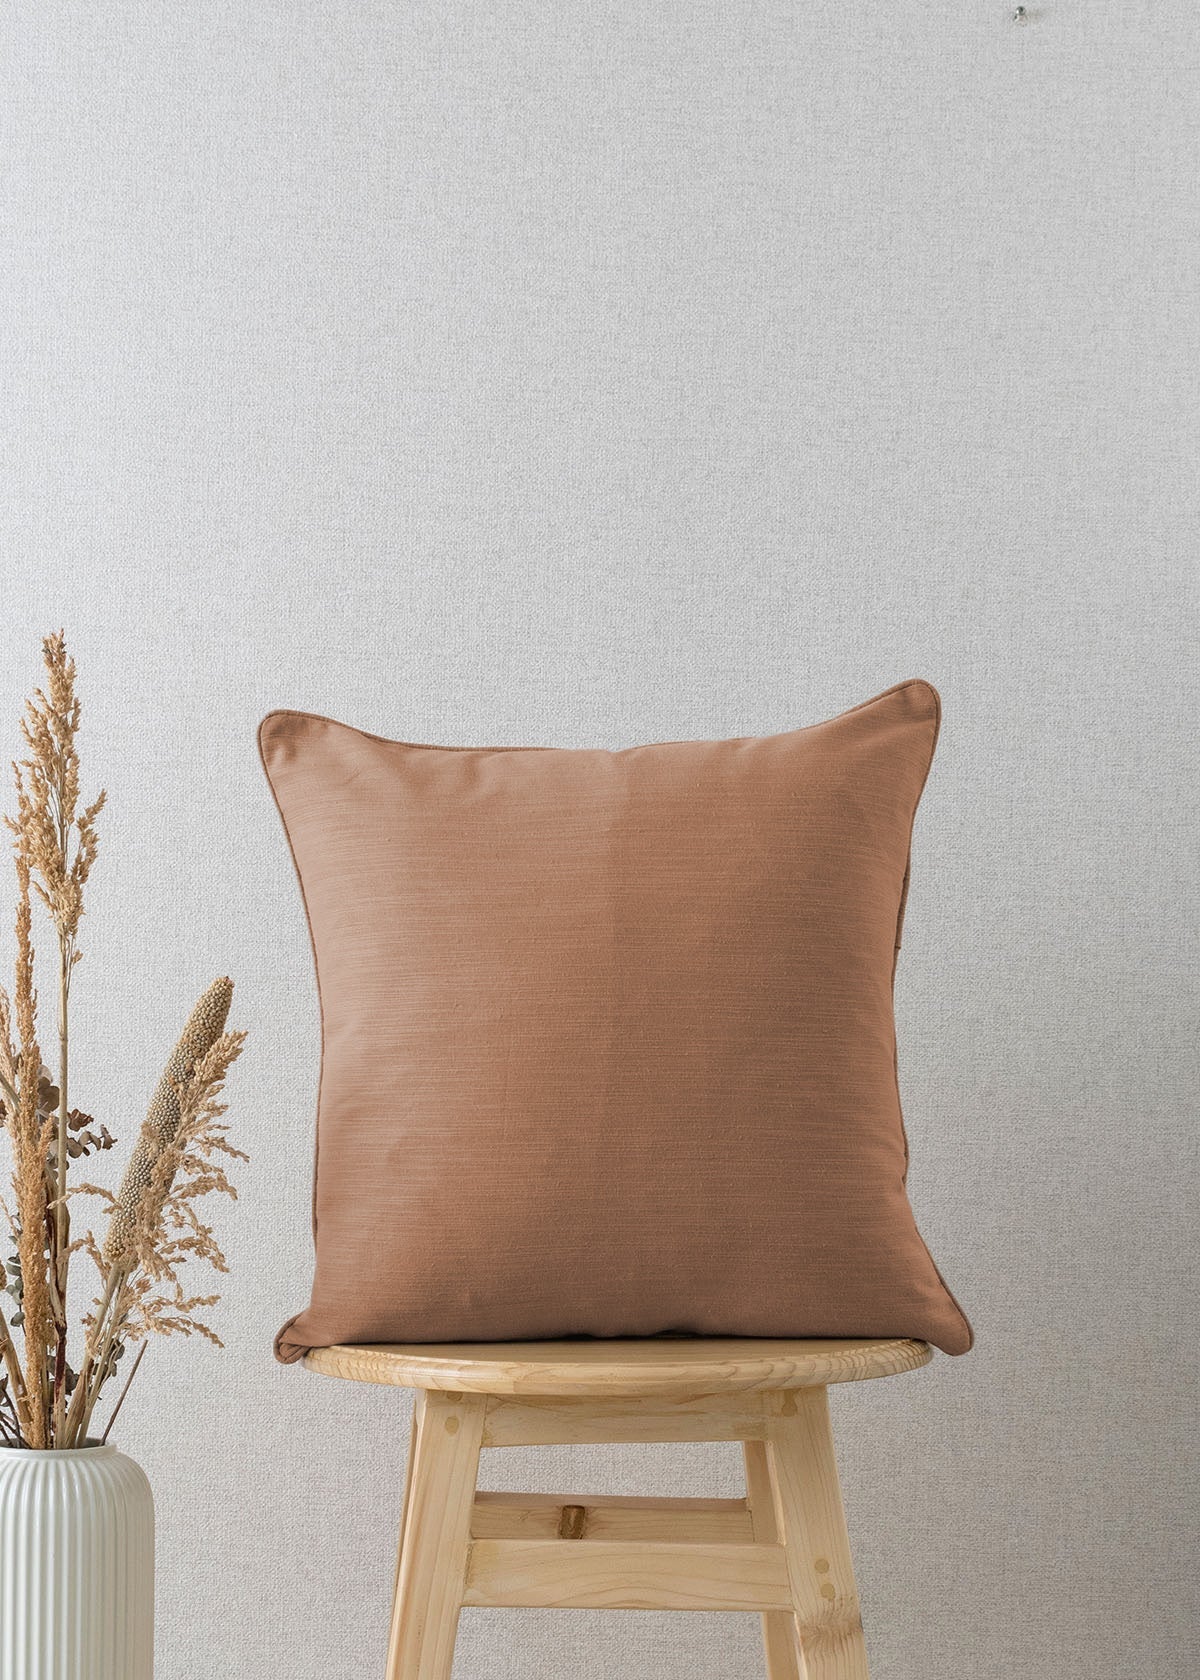 Solid chocolate brown 100% cotton plain cushion cover for sofa